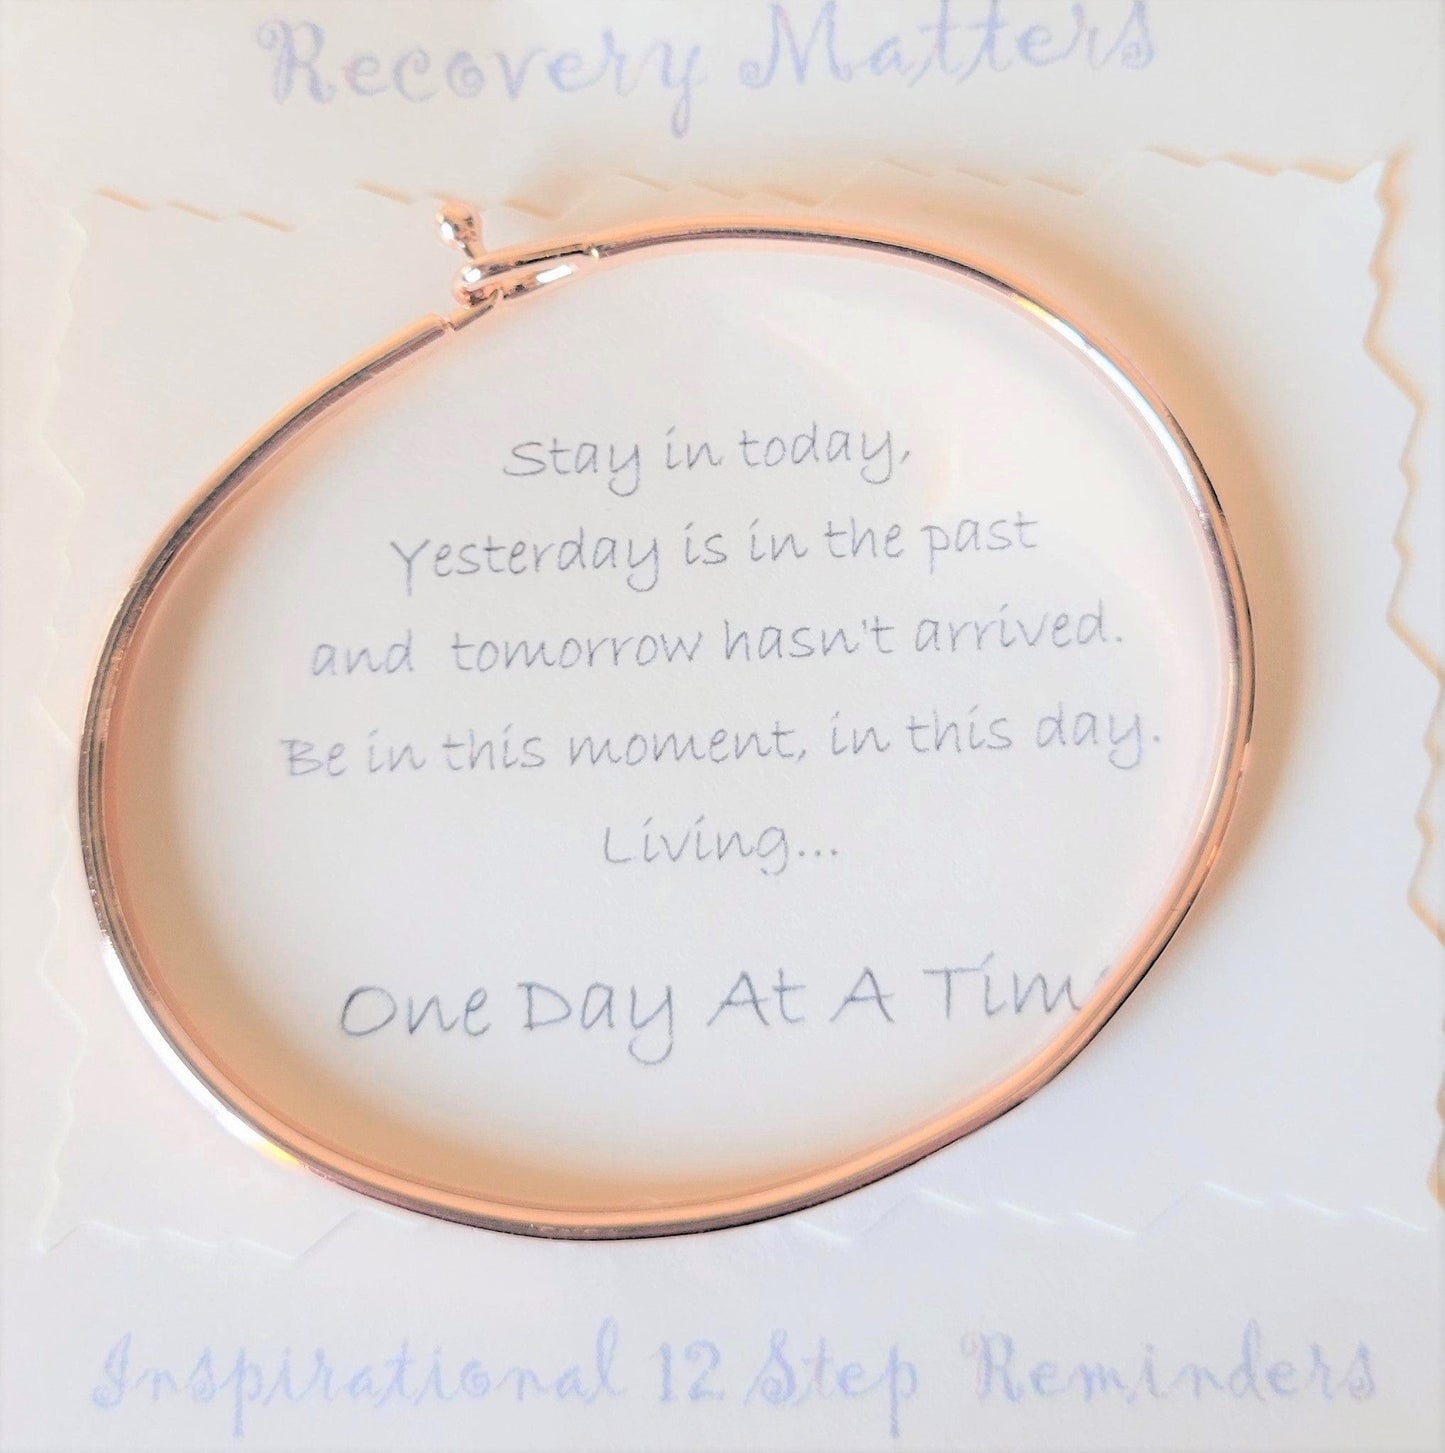 "One Day At A Time" Bracelet By Recovery Matters